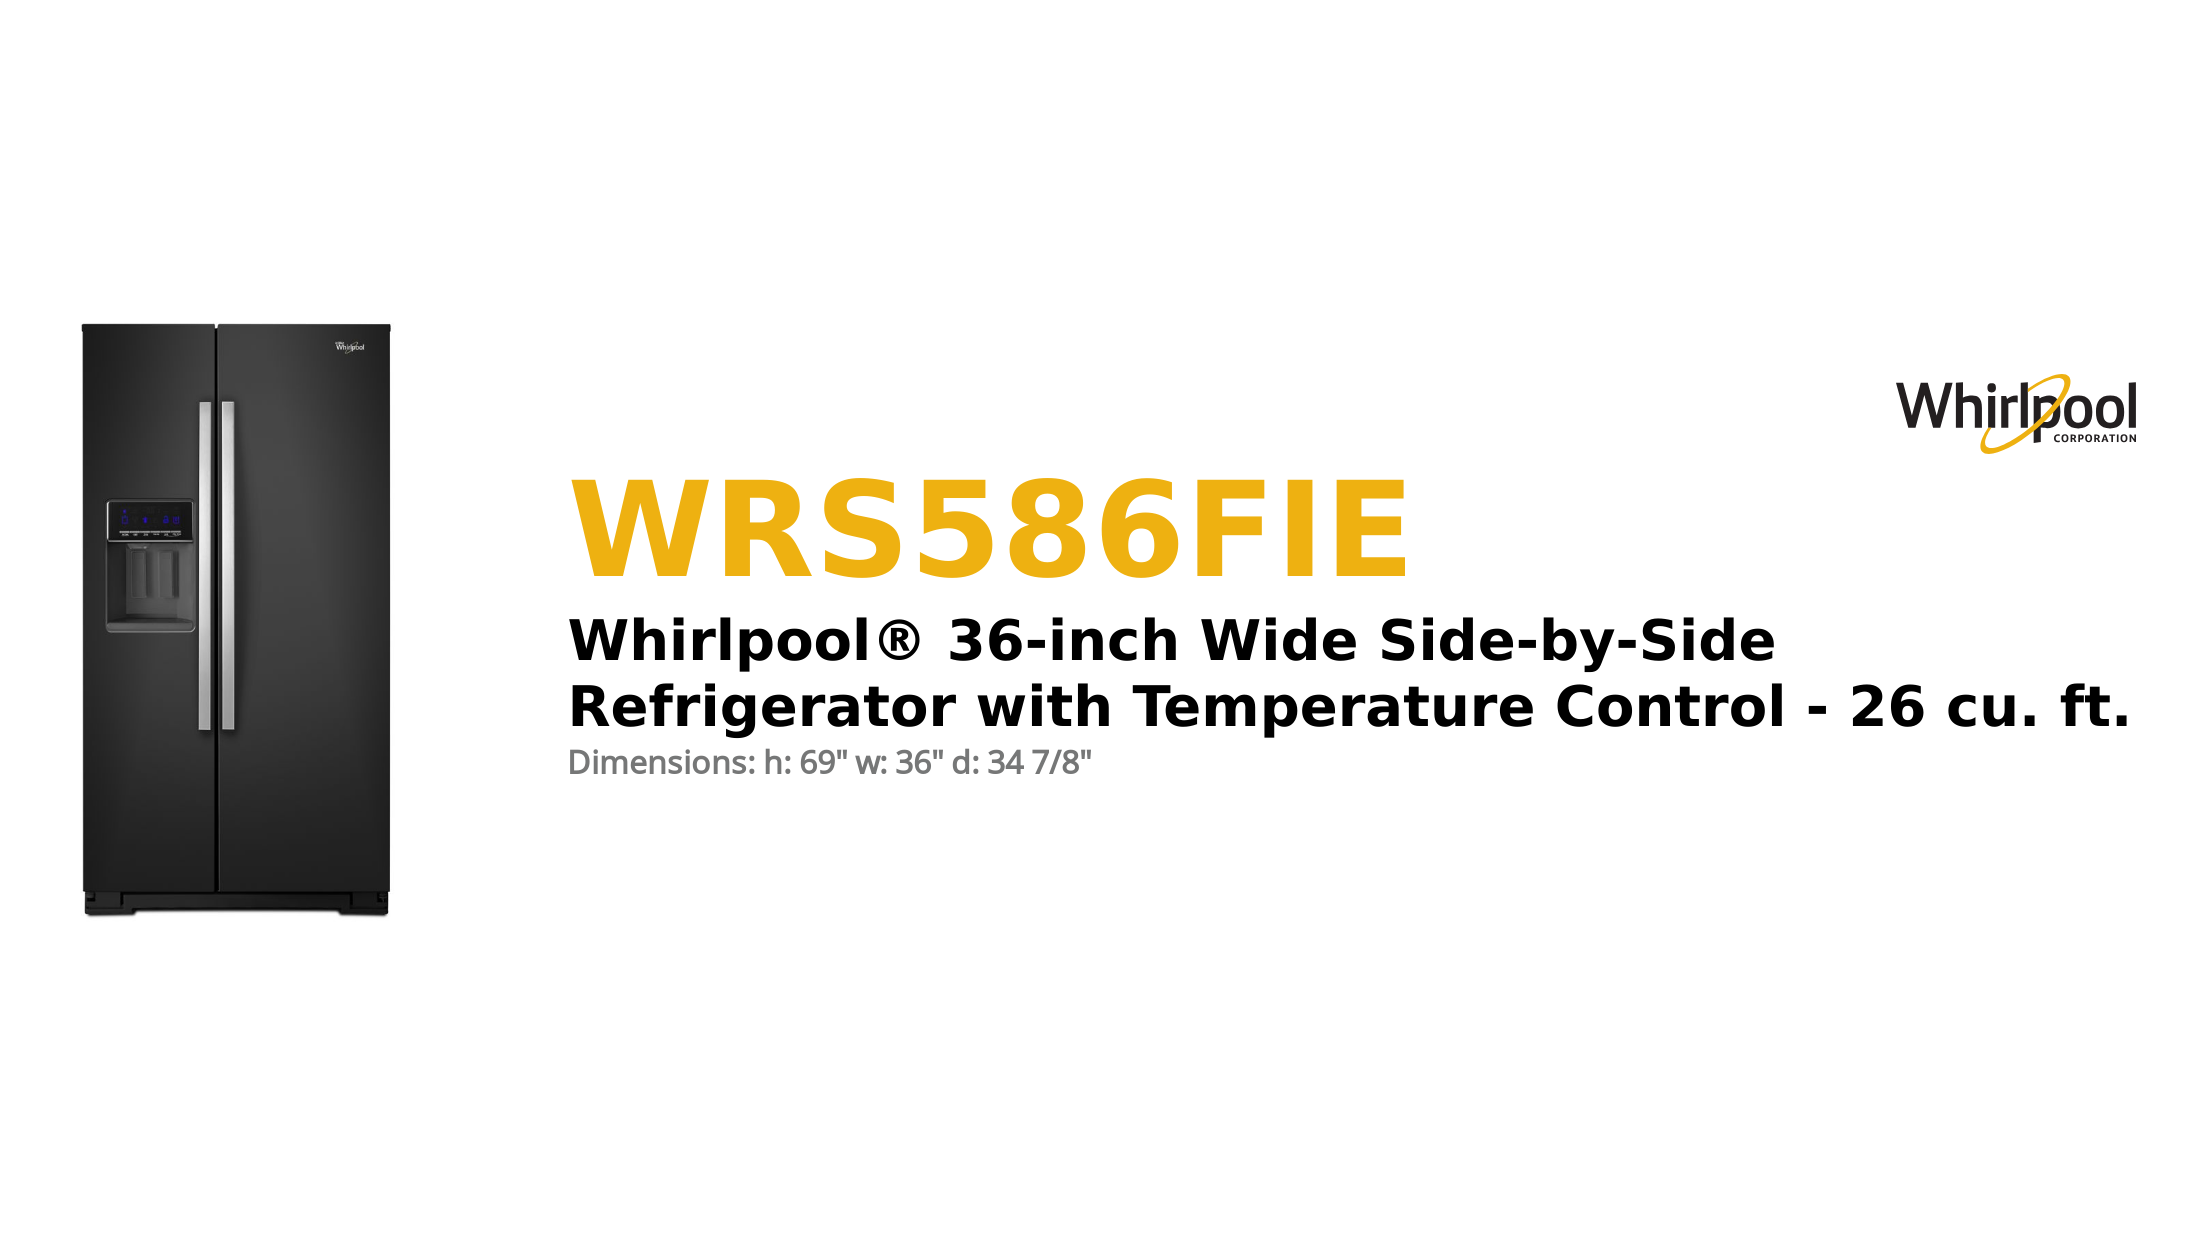 Whirlpool® 36-inch Wide Side-by-Side Refrigerator with Temperature Control - 26 cu. ft.